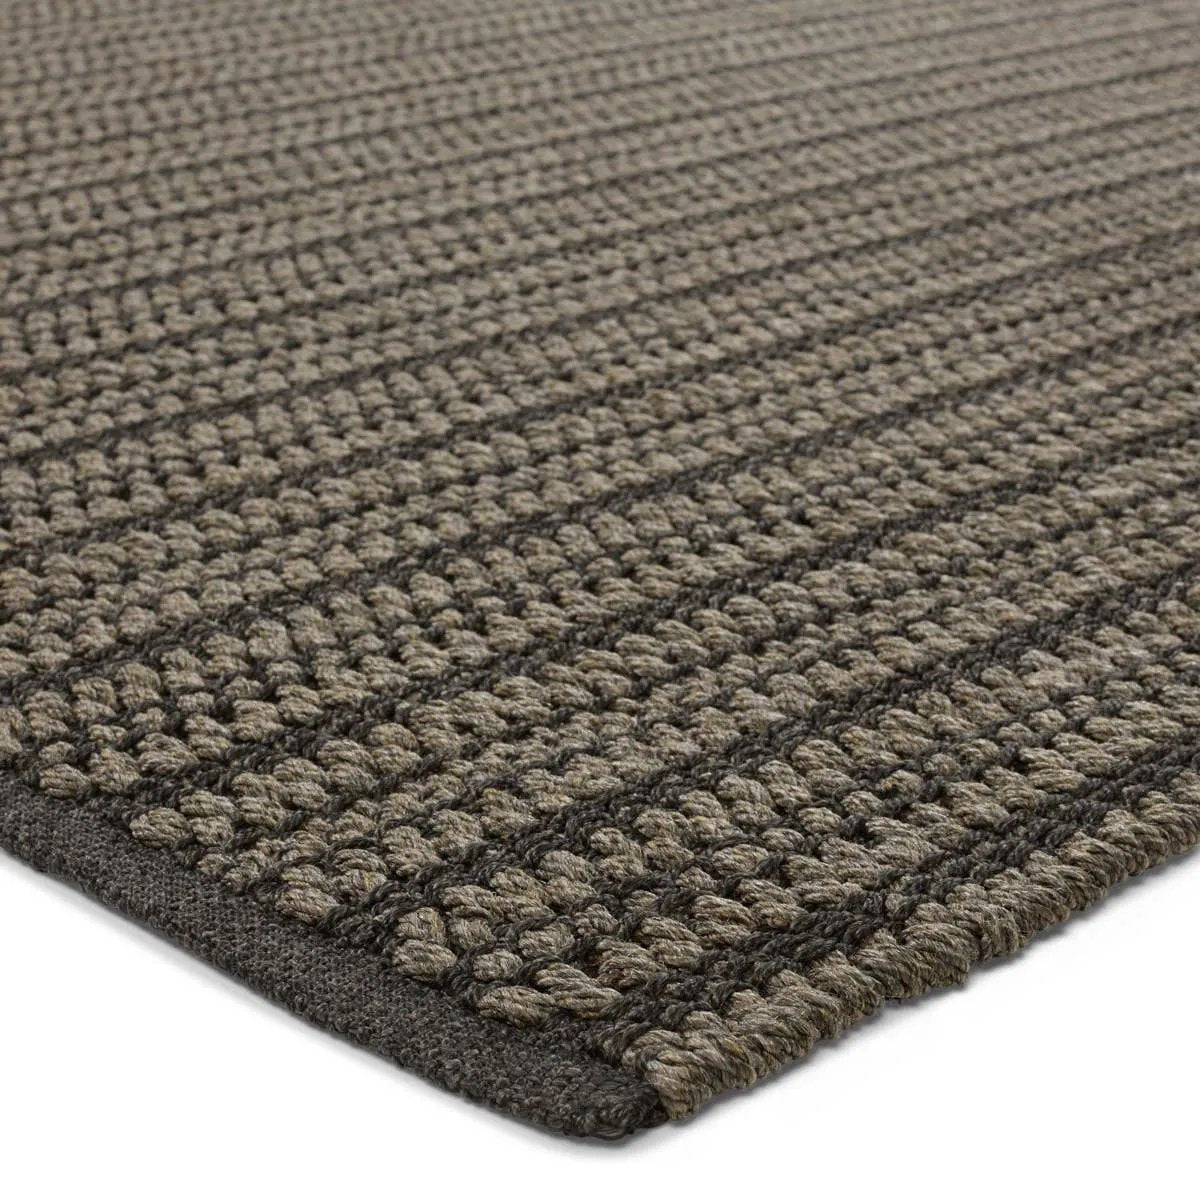 Handwoven of thick and durable performance fibers, the Talin Elmas offers a sturdy accent with evocative texture to any space. Neutral, versatile colorways combine with an undulating striped weave for a not-so-solid, but perfectly grounding, modern design. Amethyst Home provides interior design, new home construction design consulting, vintage area rugs, and lighting in the Calabasas metro area.